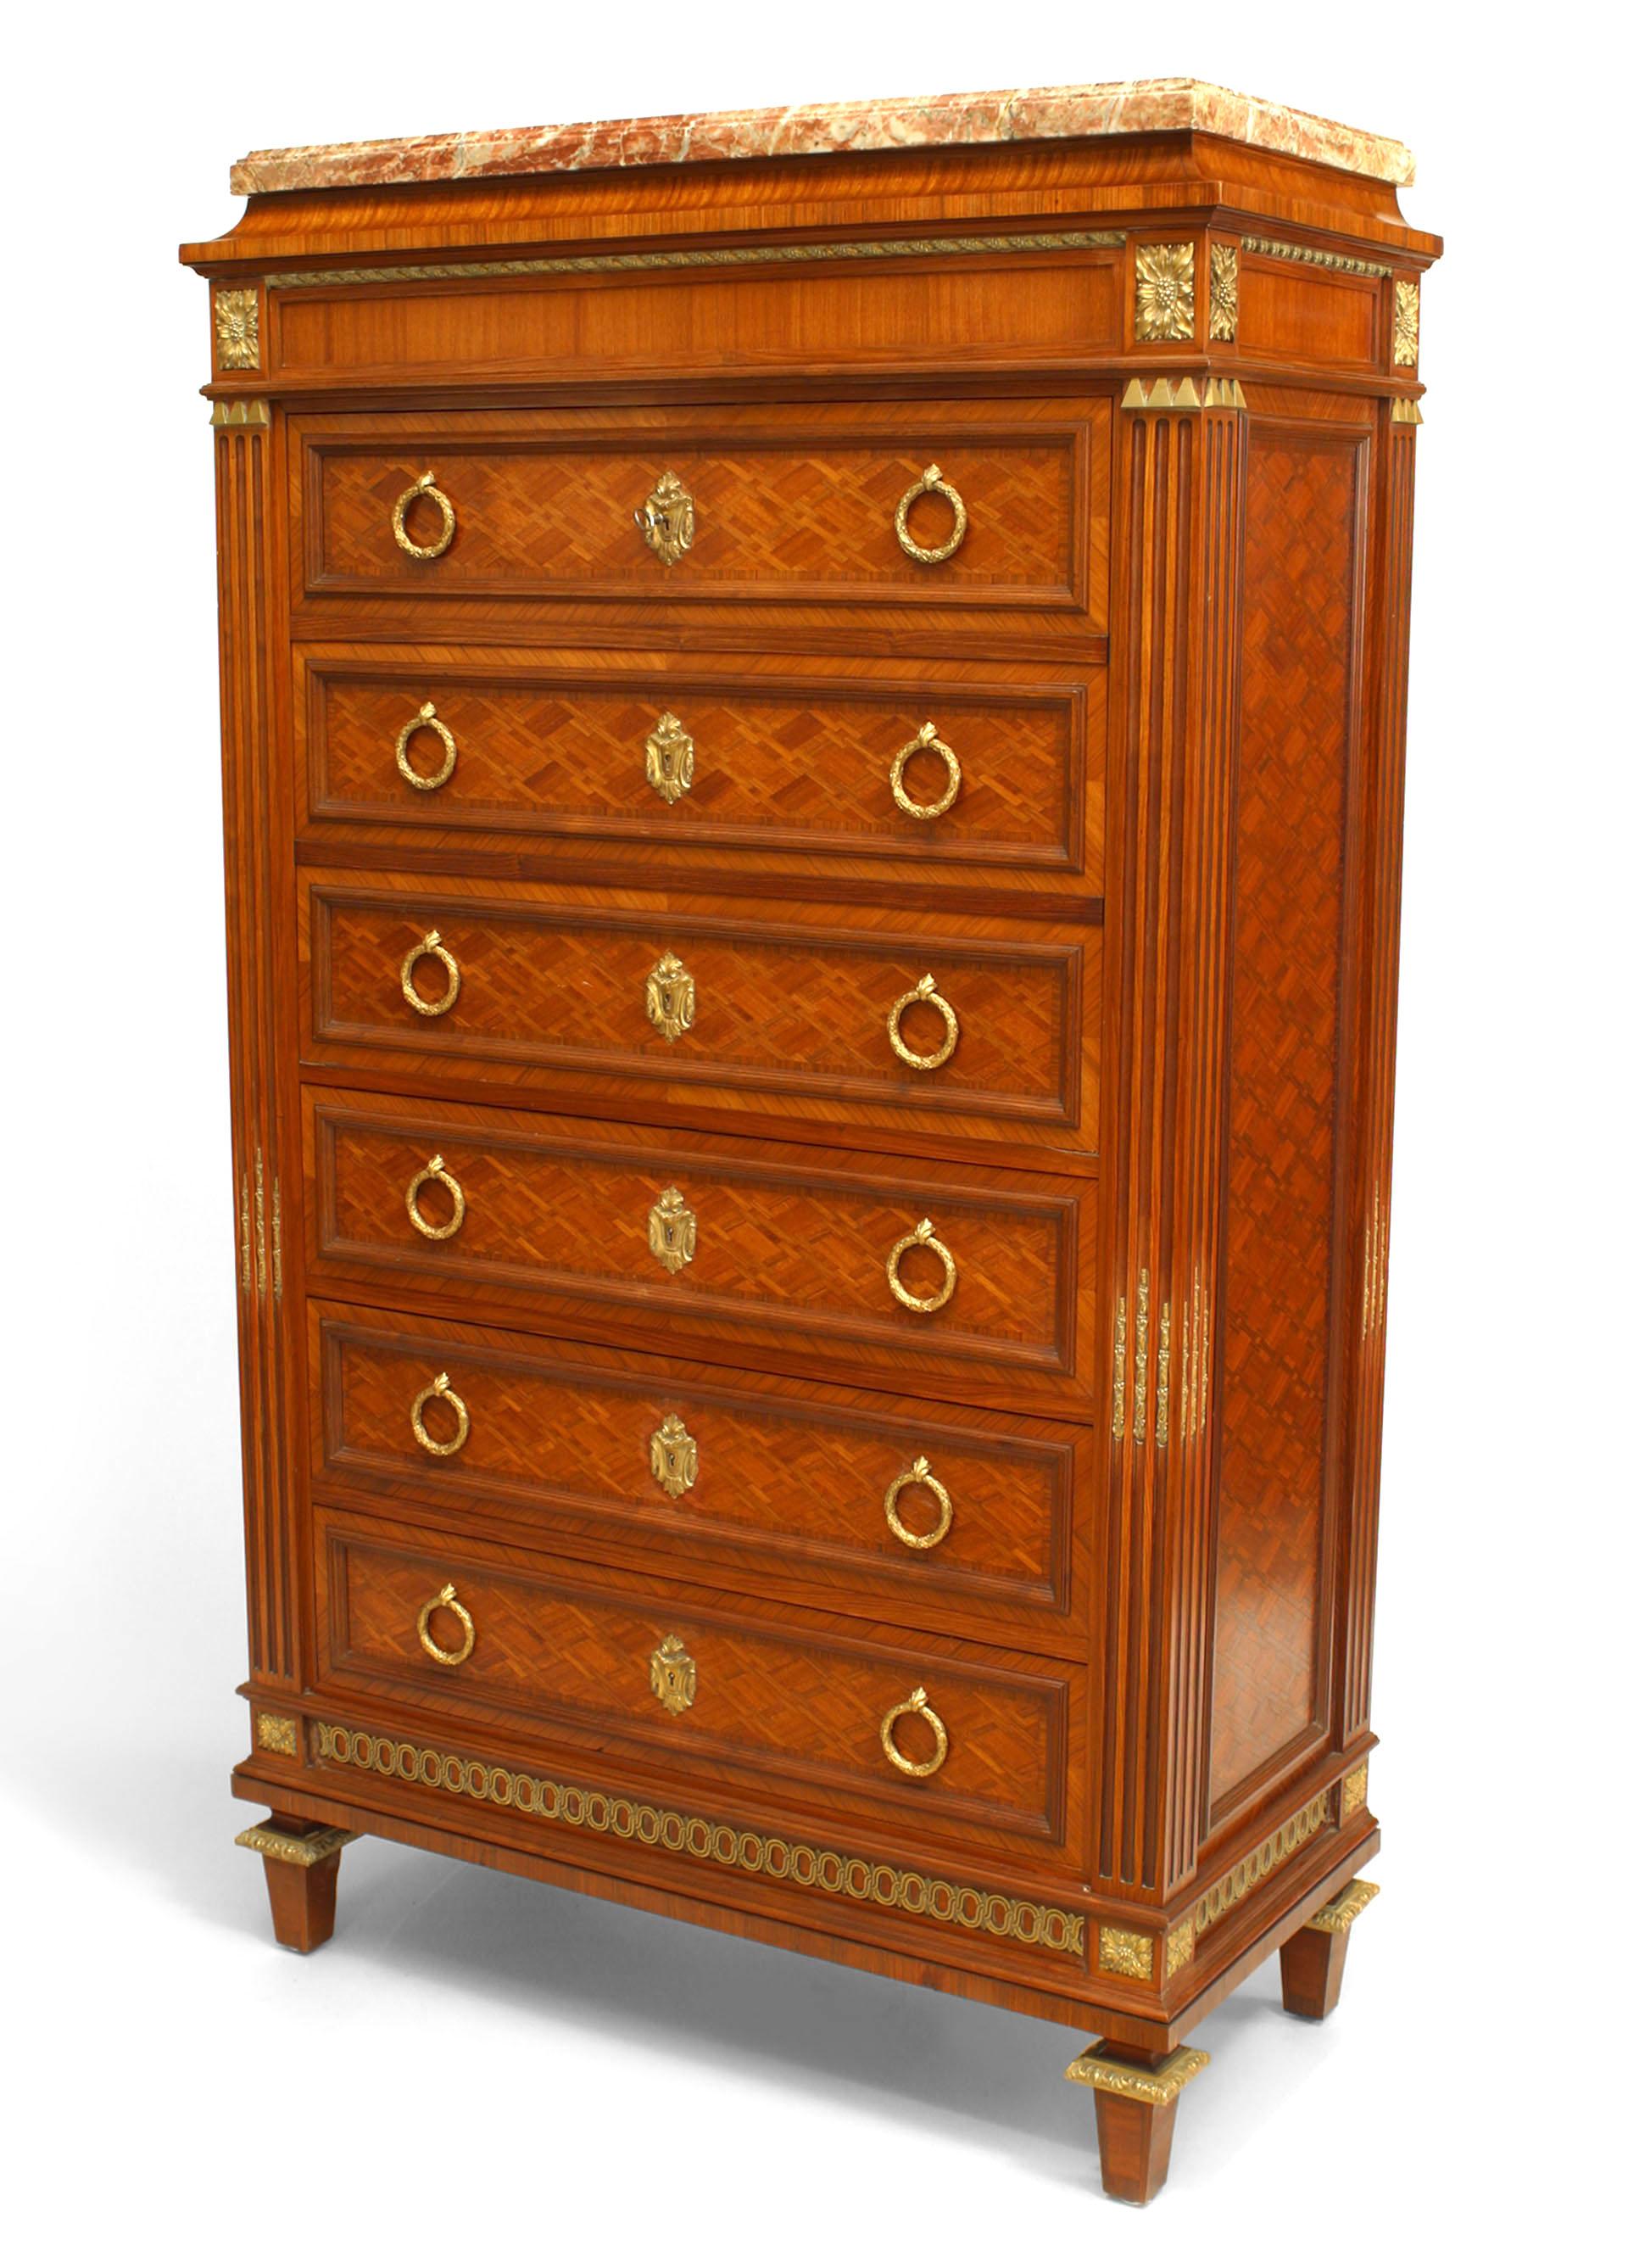 French Louis XVI-style (19th Century) parquetry inlaid drop front secretary abattant with gilt bronze trim and ring hands with 4 drawers below a fitted interior with a leather writing surface
